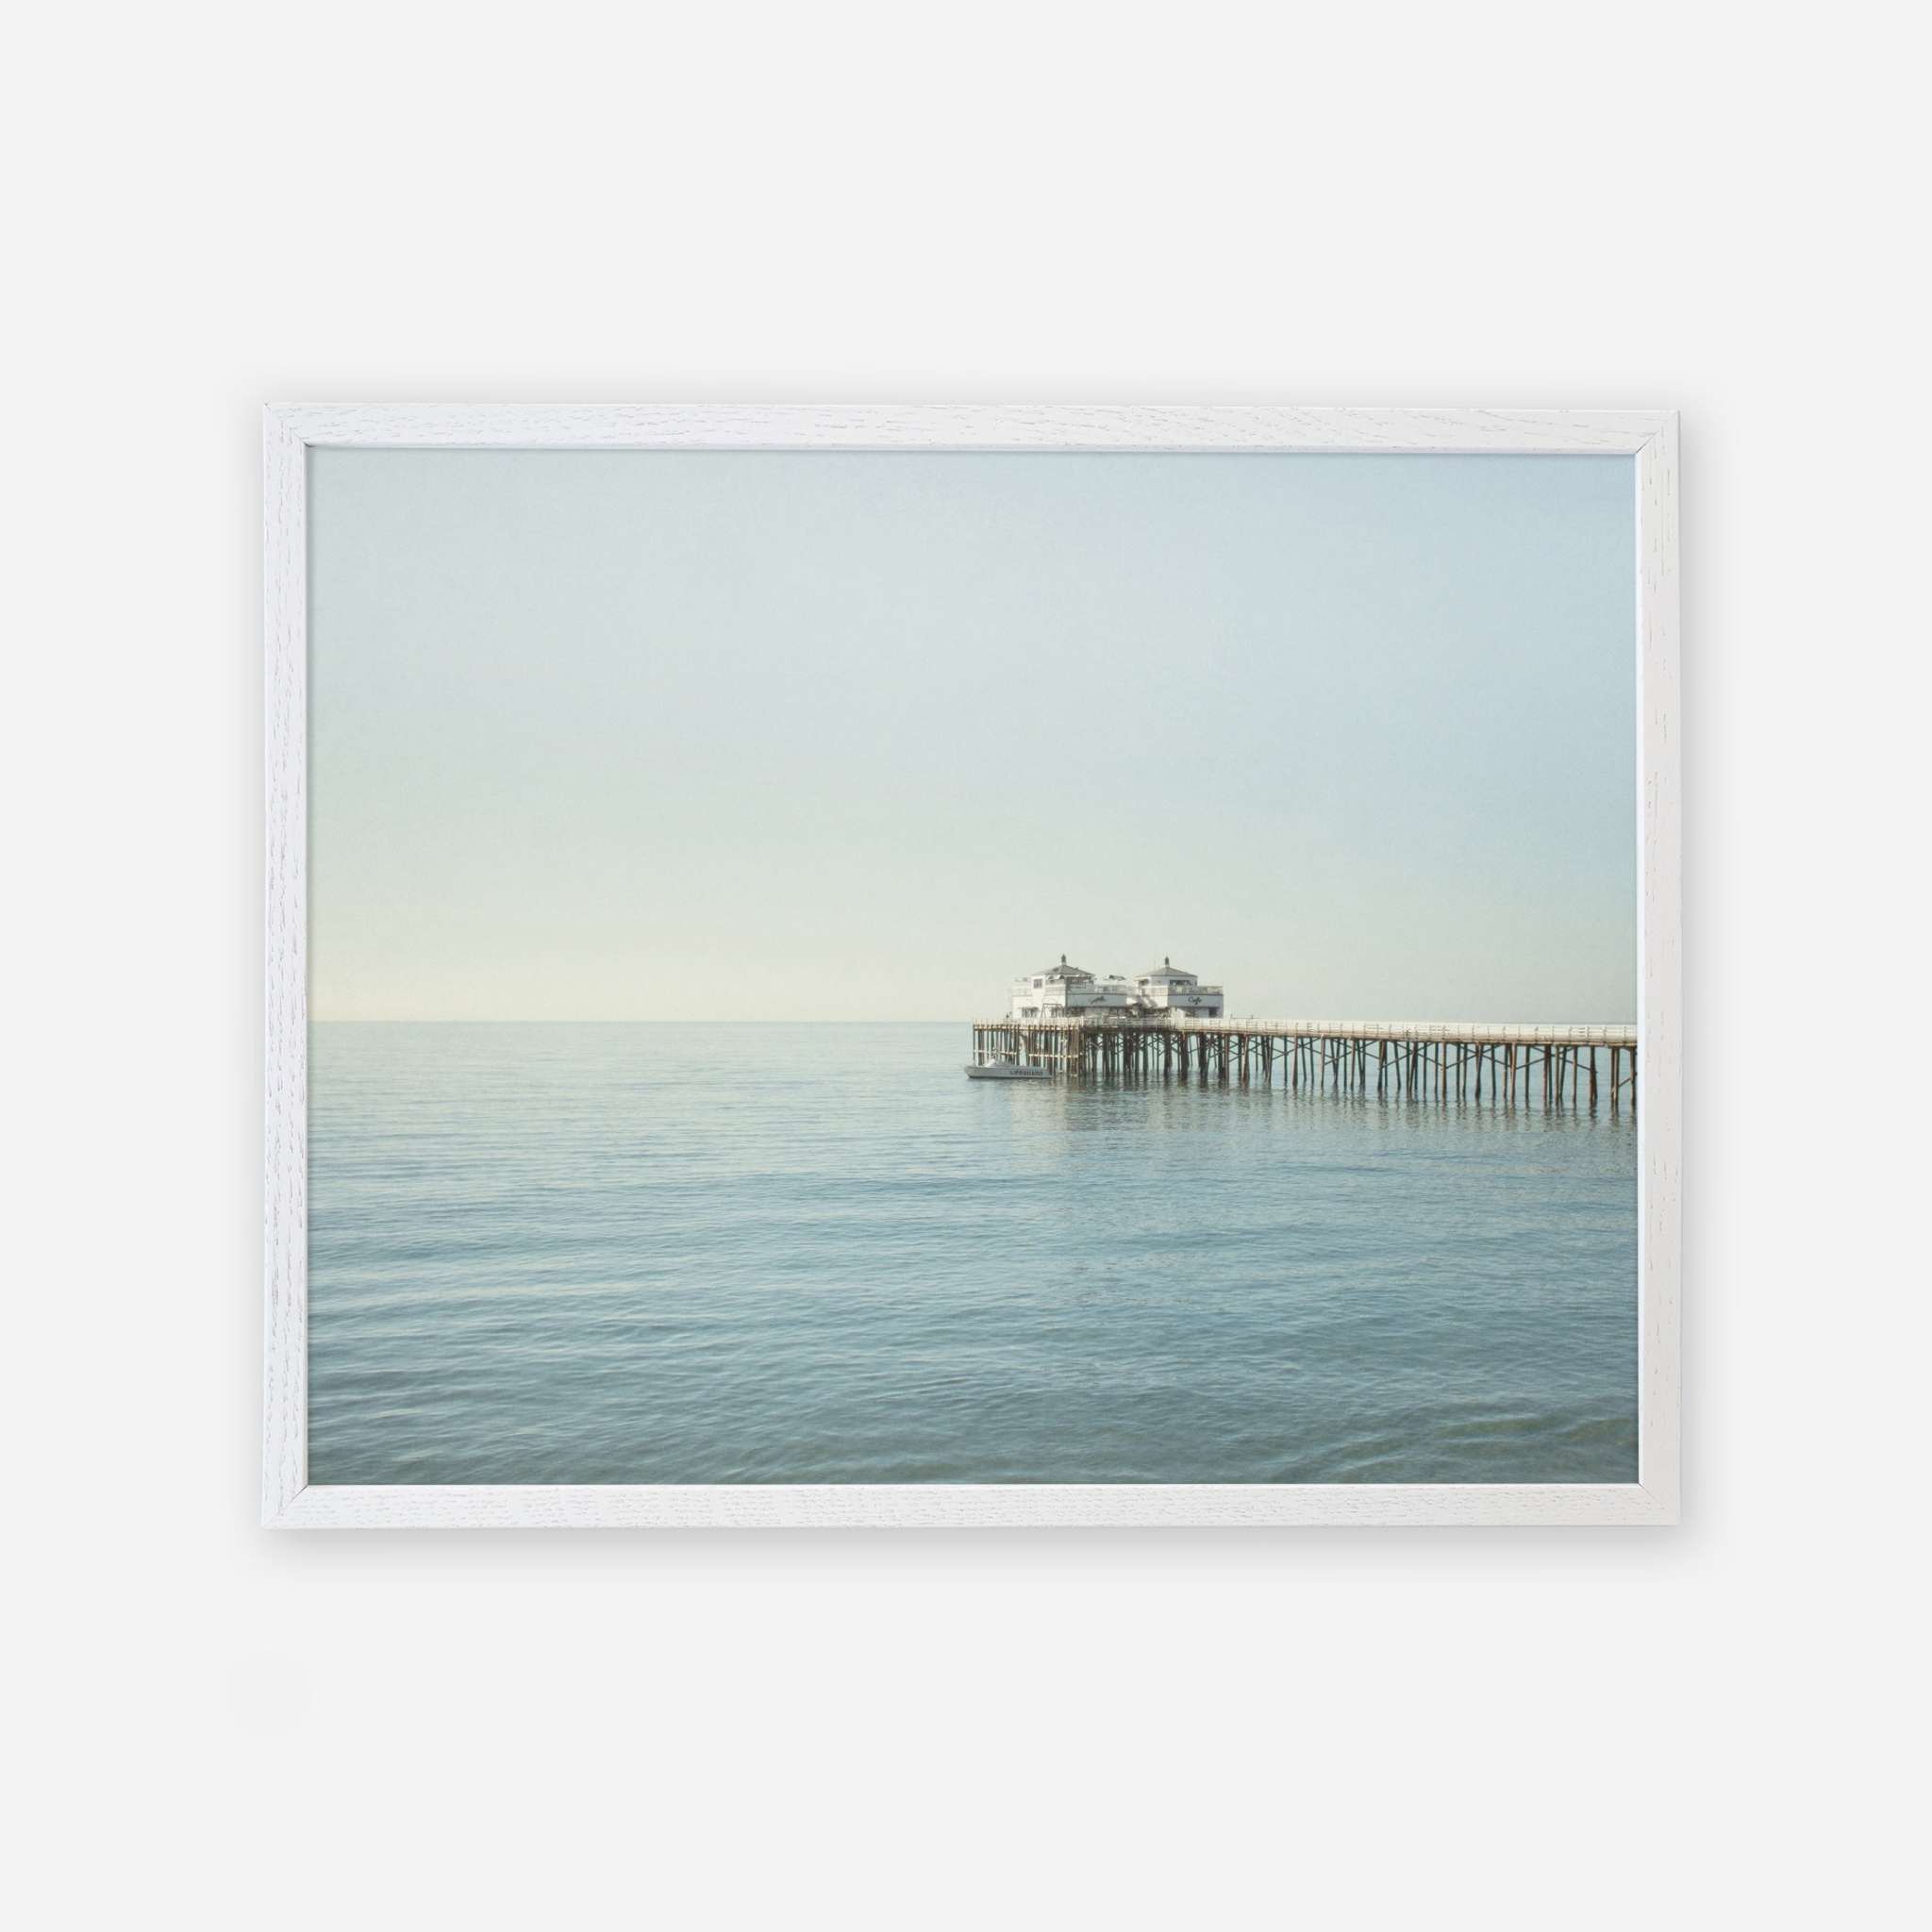 A framed photograph of a tranquil seascape with Malibu Pier extending into the calm sea under a soft, pale sky. The image conveys a serene, timeless atmosphere featuring the Coastal Print of Malibu Pier in California &#39;All Calm in Malibu&#39; by Offley Green.